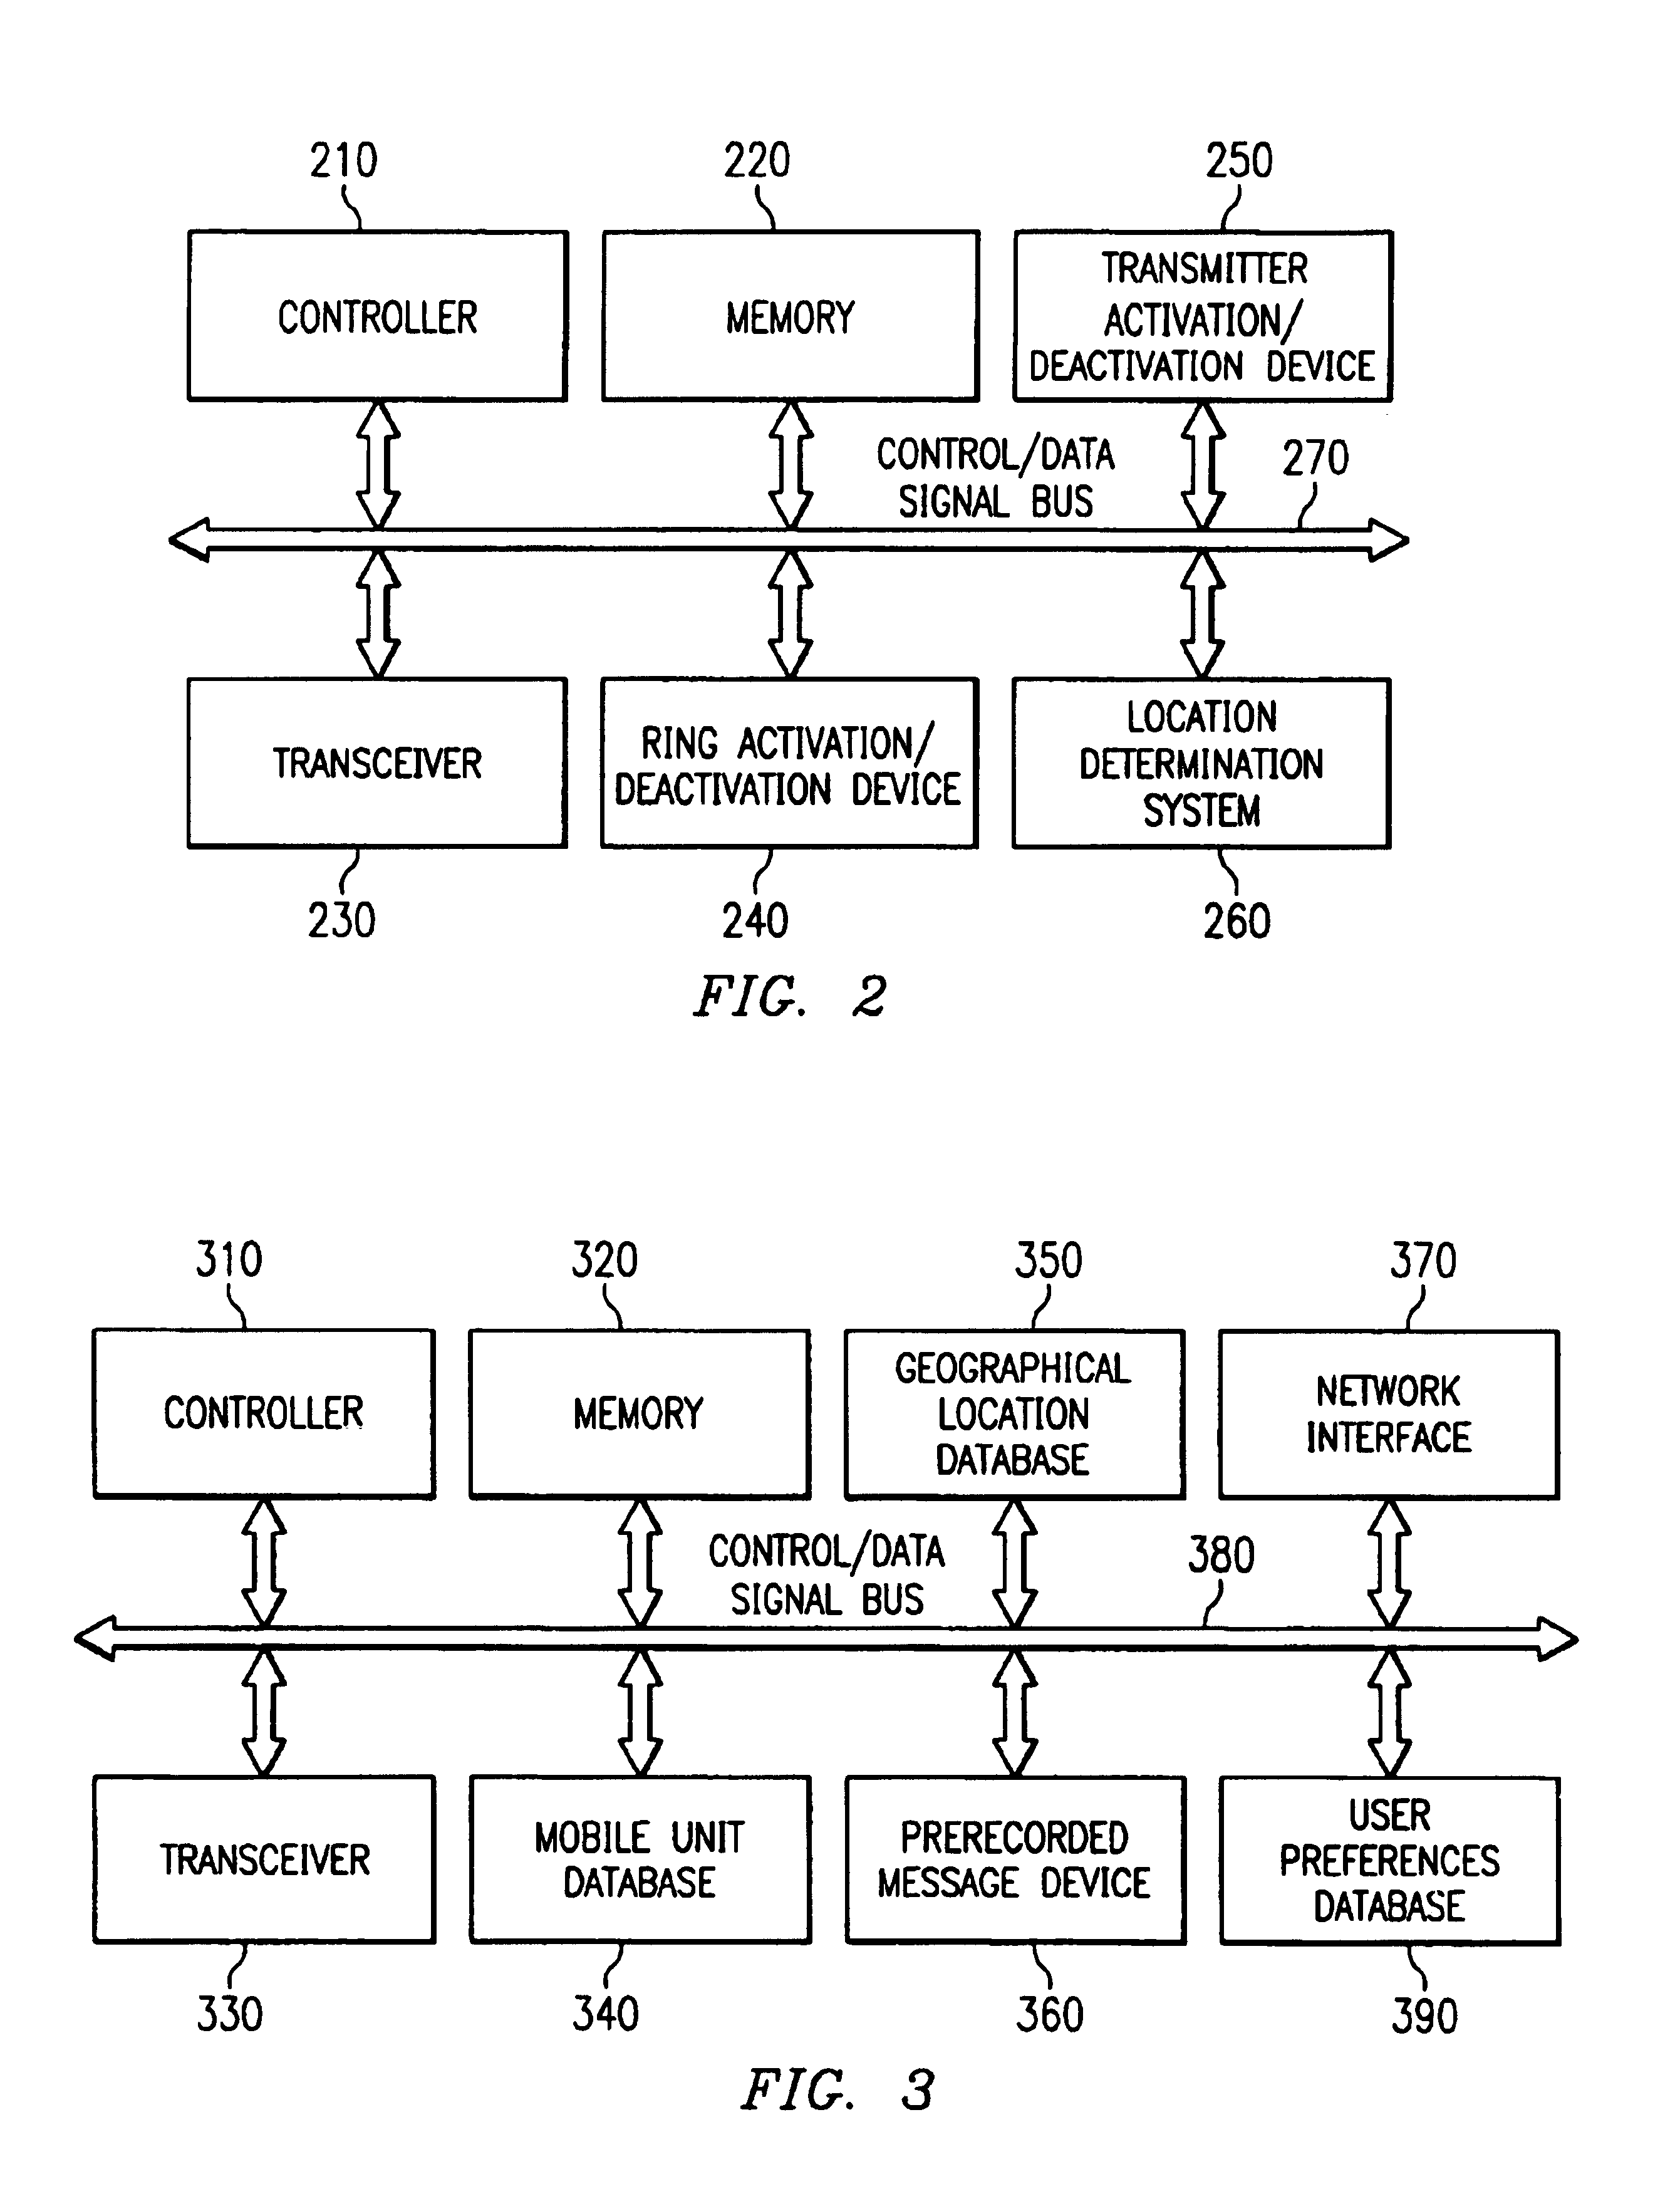 Apparatus and method for managing a mobile phone answering mode and outgoing message based on a location of the mobile phone